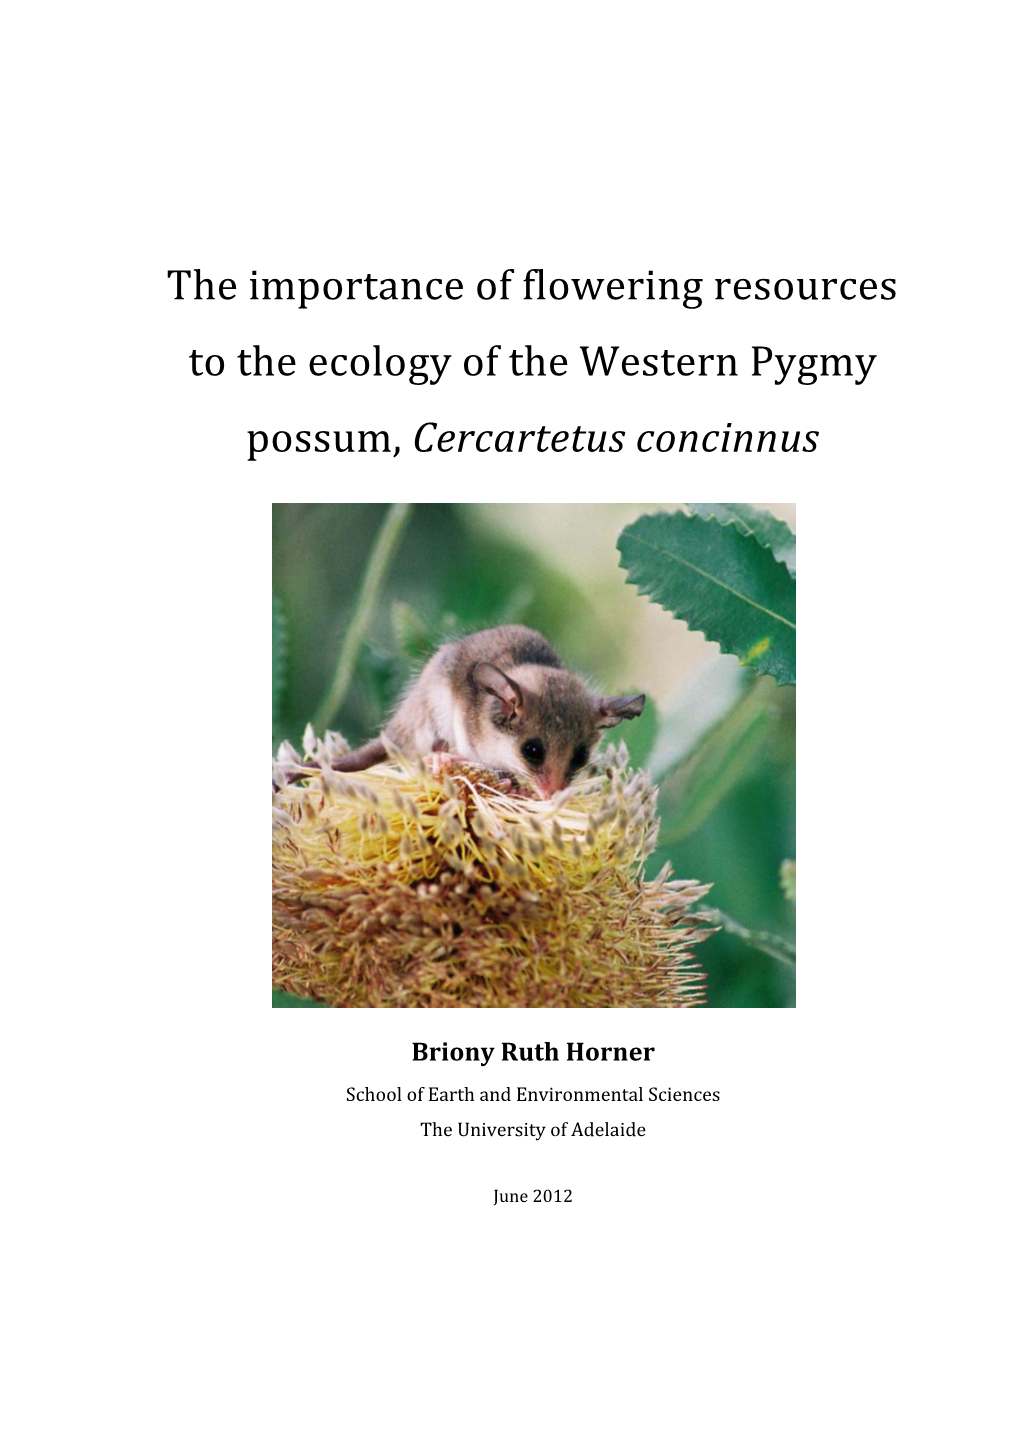 The Importance of Flowering Resources to the Ecology of the Western Pygmy Possum, Cercartetus Concinnus